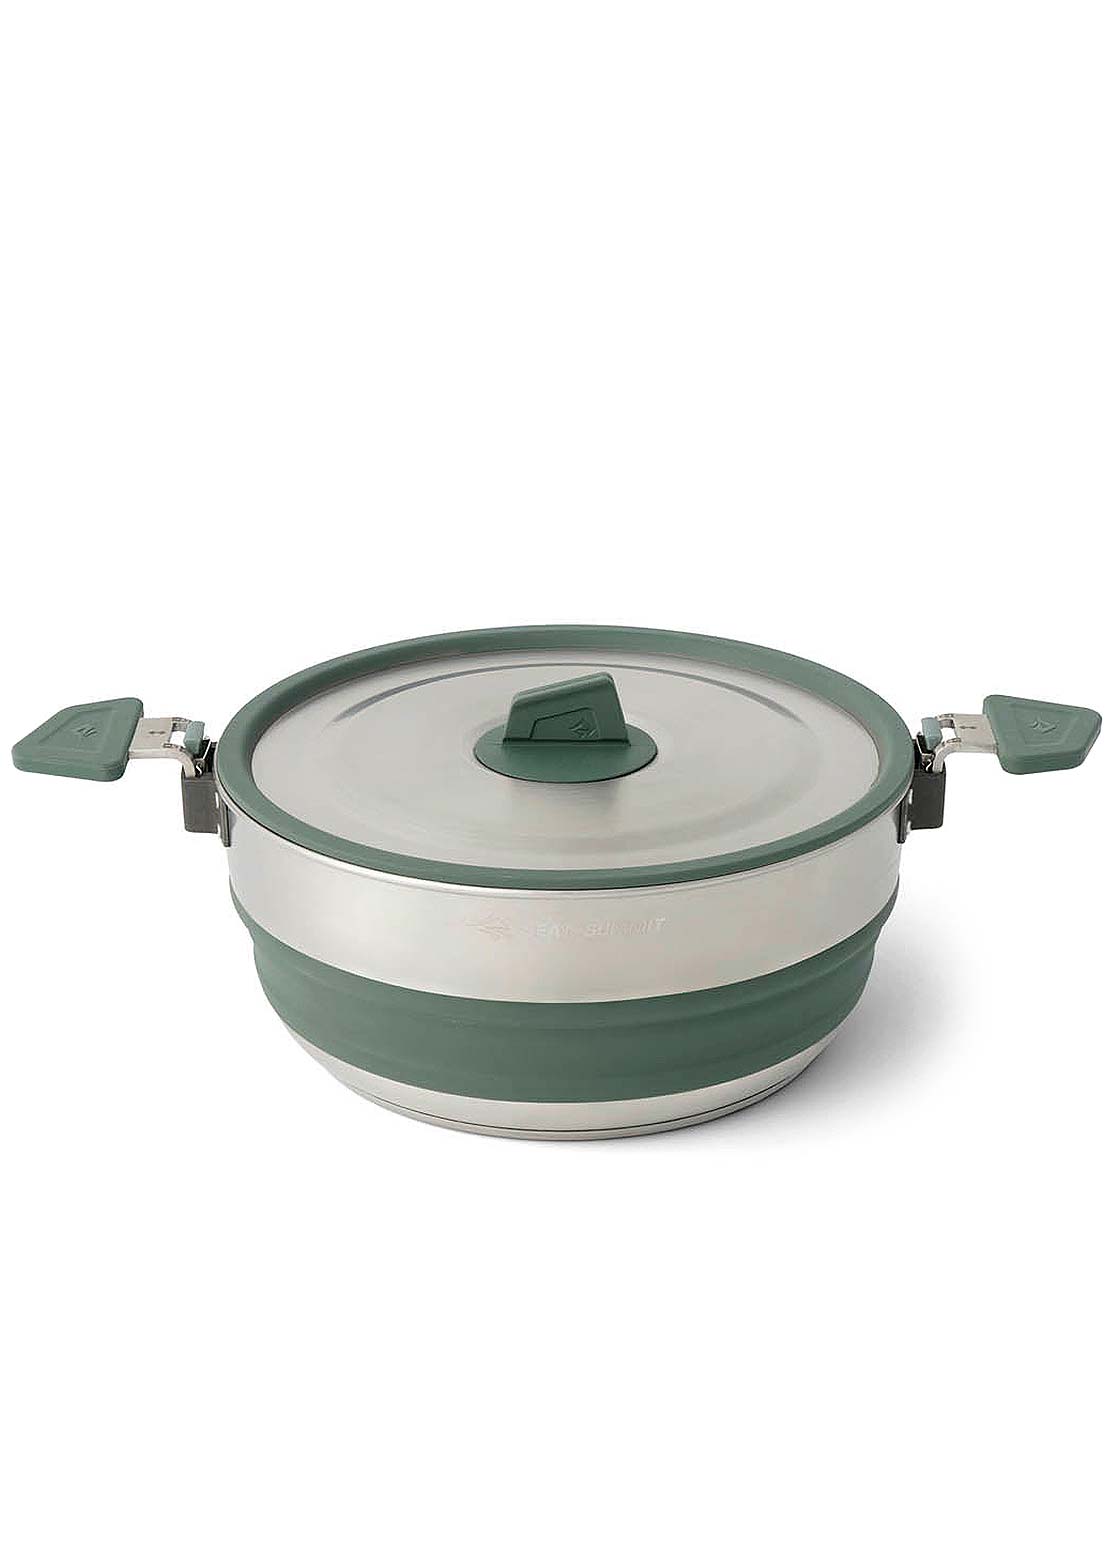 Sea To Summit Detour Stainless Steel Collapsible Pot Laurel Wreath Green